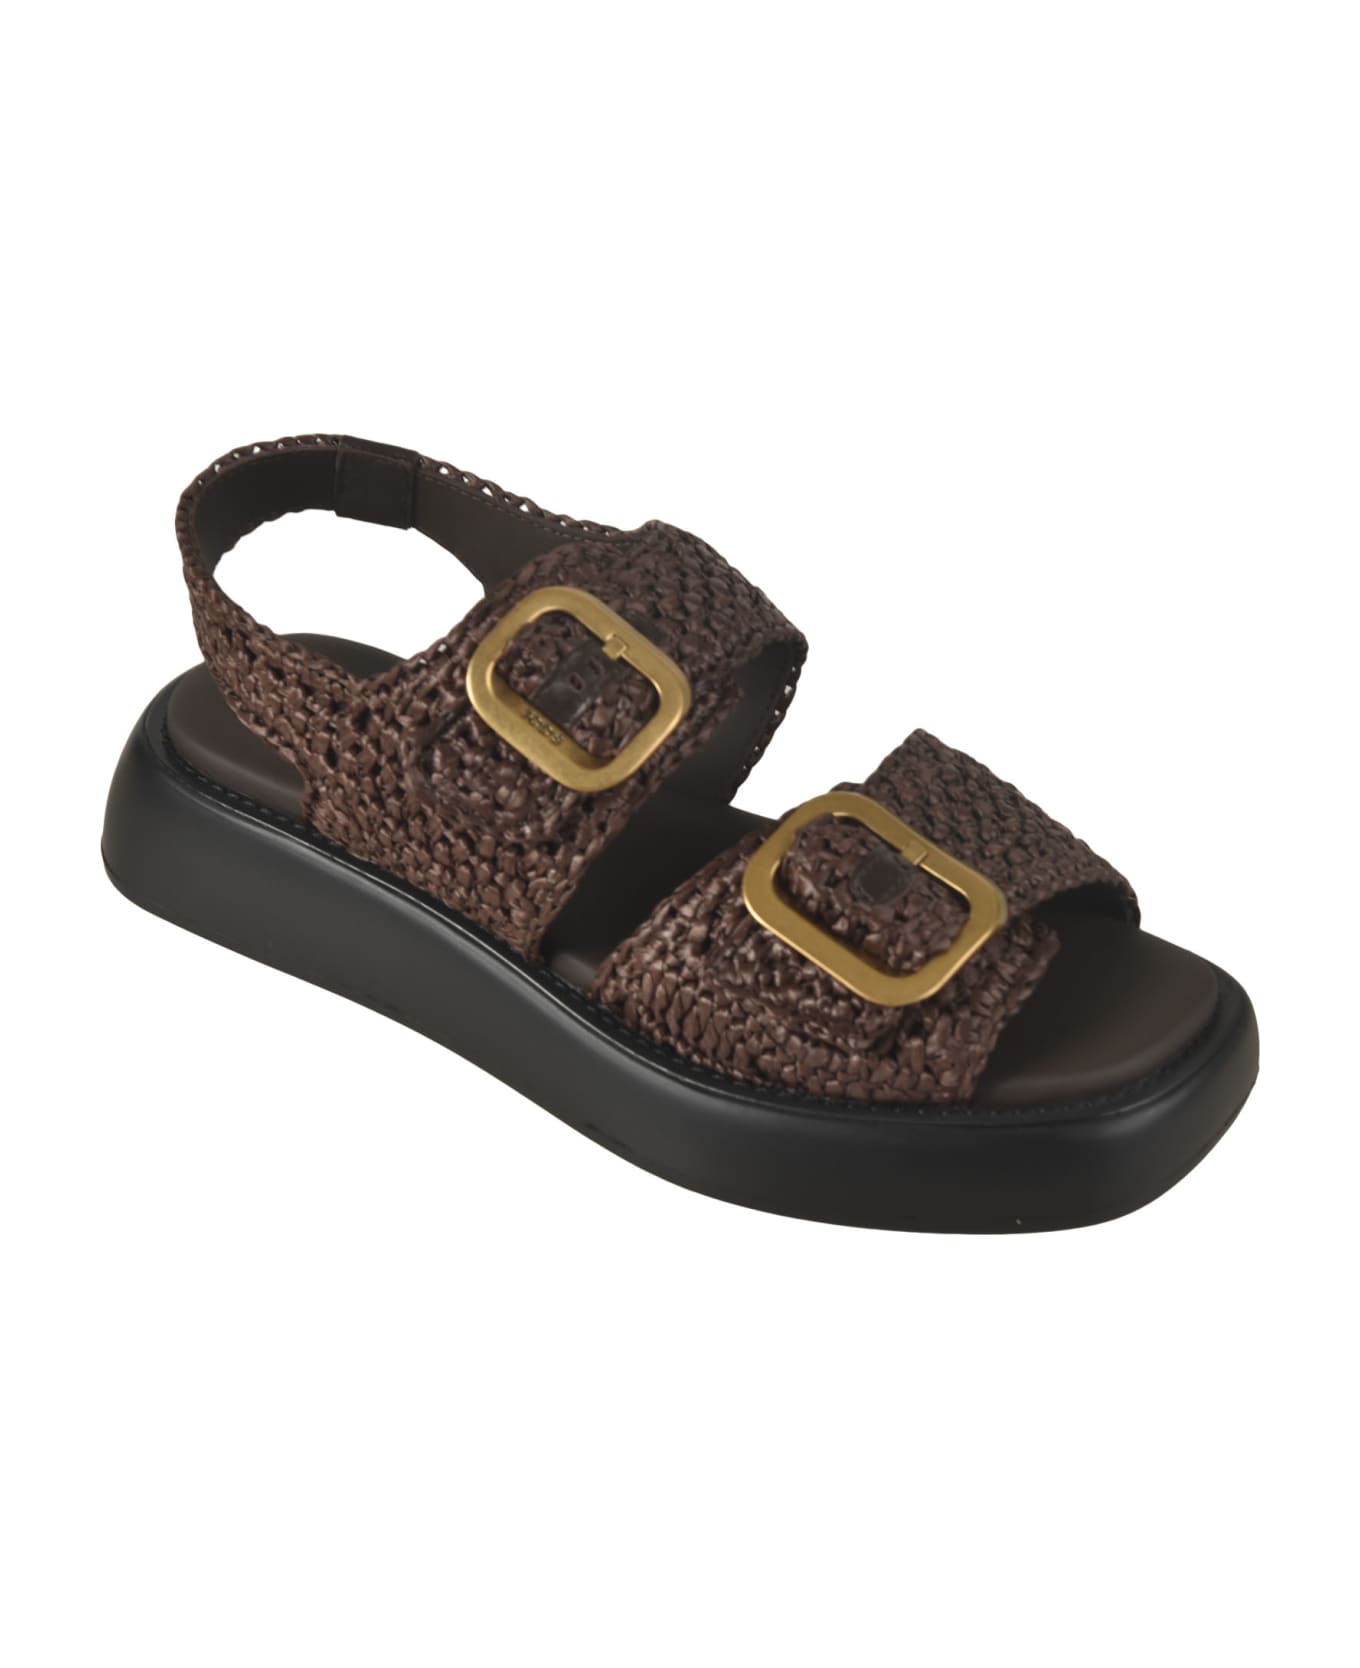 Tod's Doppia Woven Sandals - Chocolate